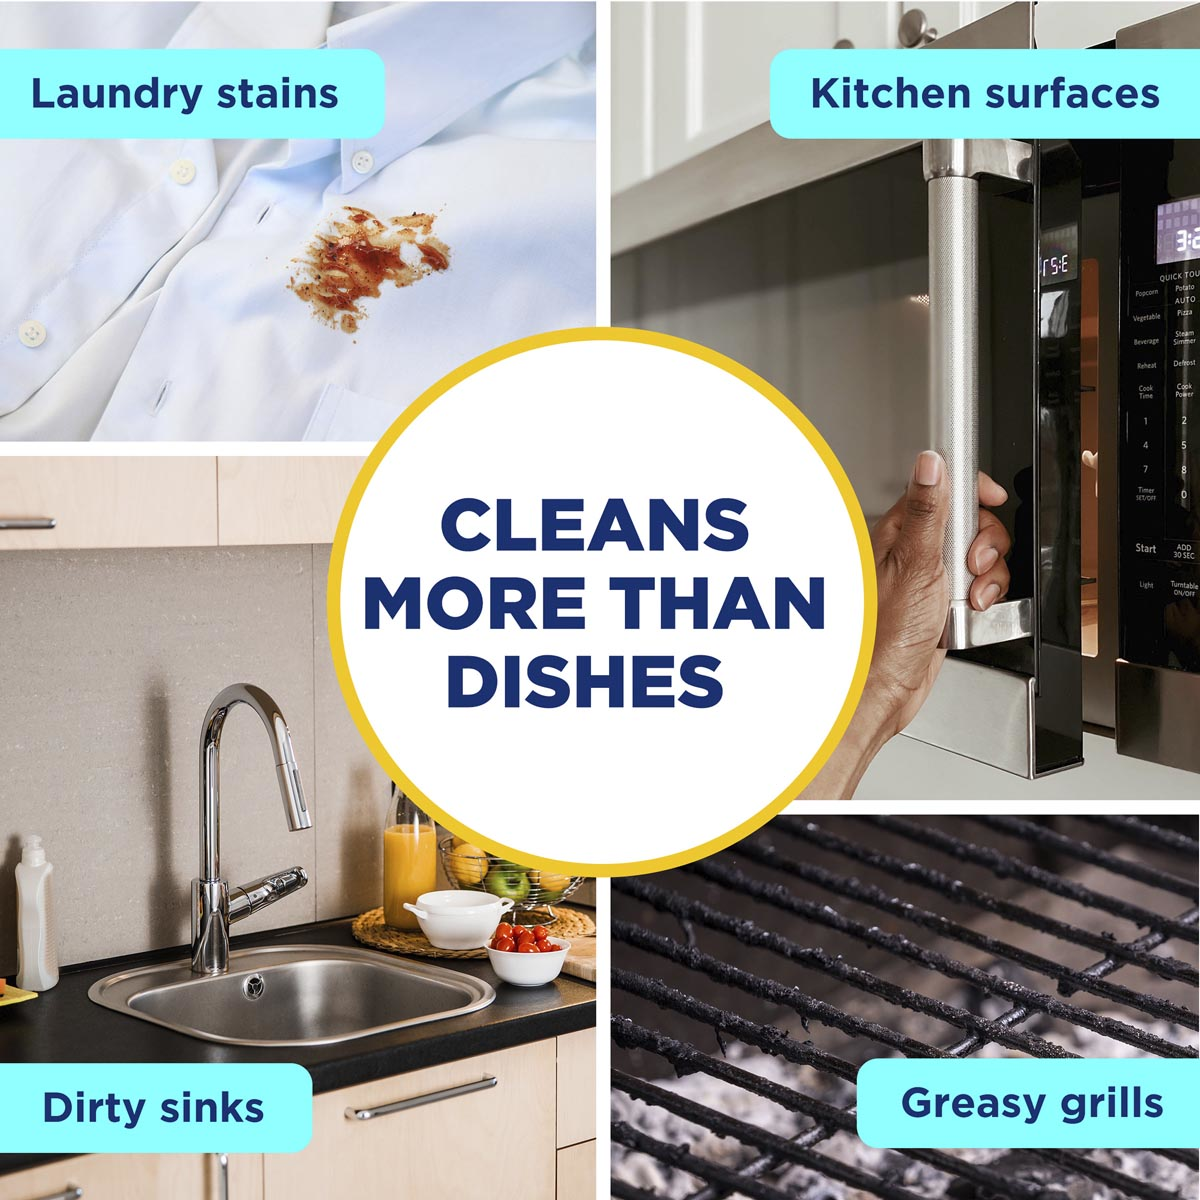 Dawn Powerwash Gain Cleans More Than Dishes - Laundry stains, Kitchen surfaces, Dirty sinks, Greasy grills